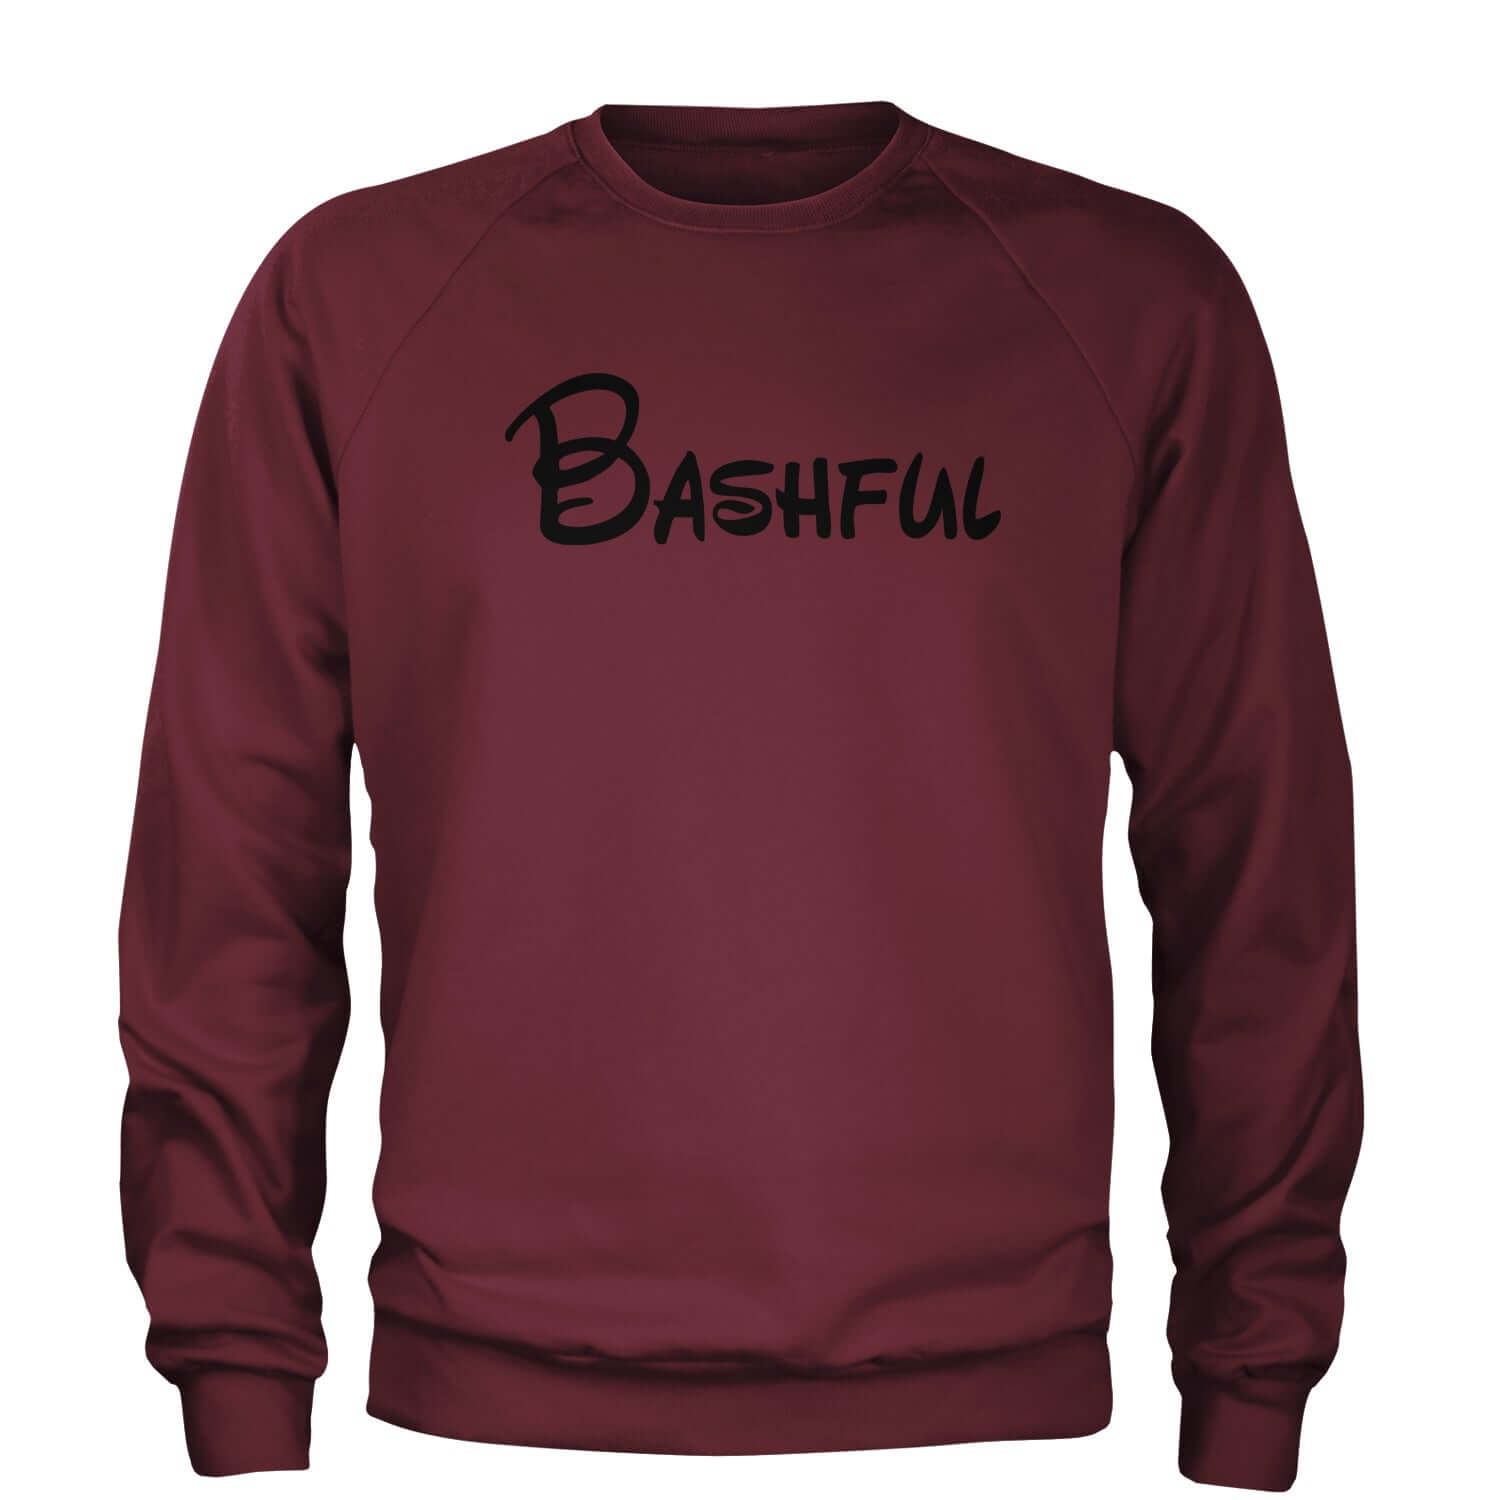 Bashful - 7 Dwarfs Costume Adult Crewneck Sweatshirt and, costume, dwarfs, group, halloween, matching, seven, snow, the, white by Expression Tees